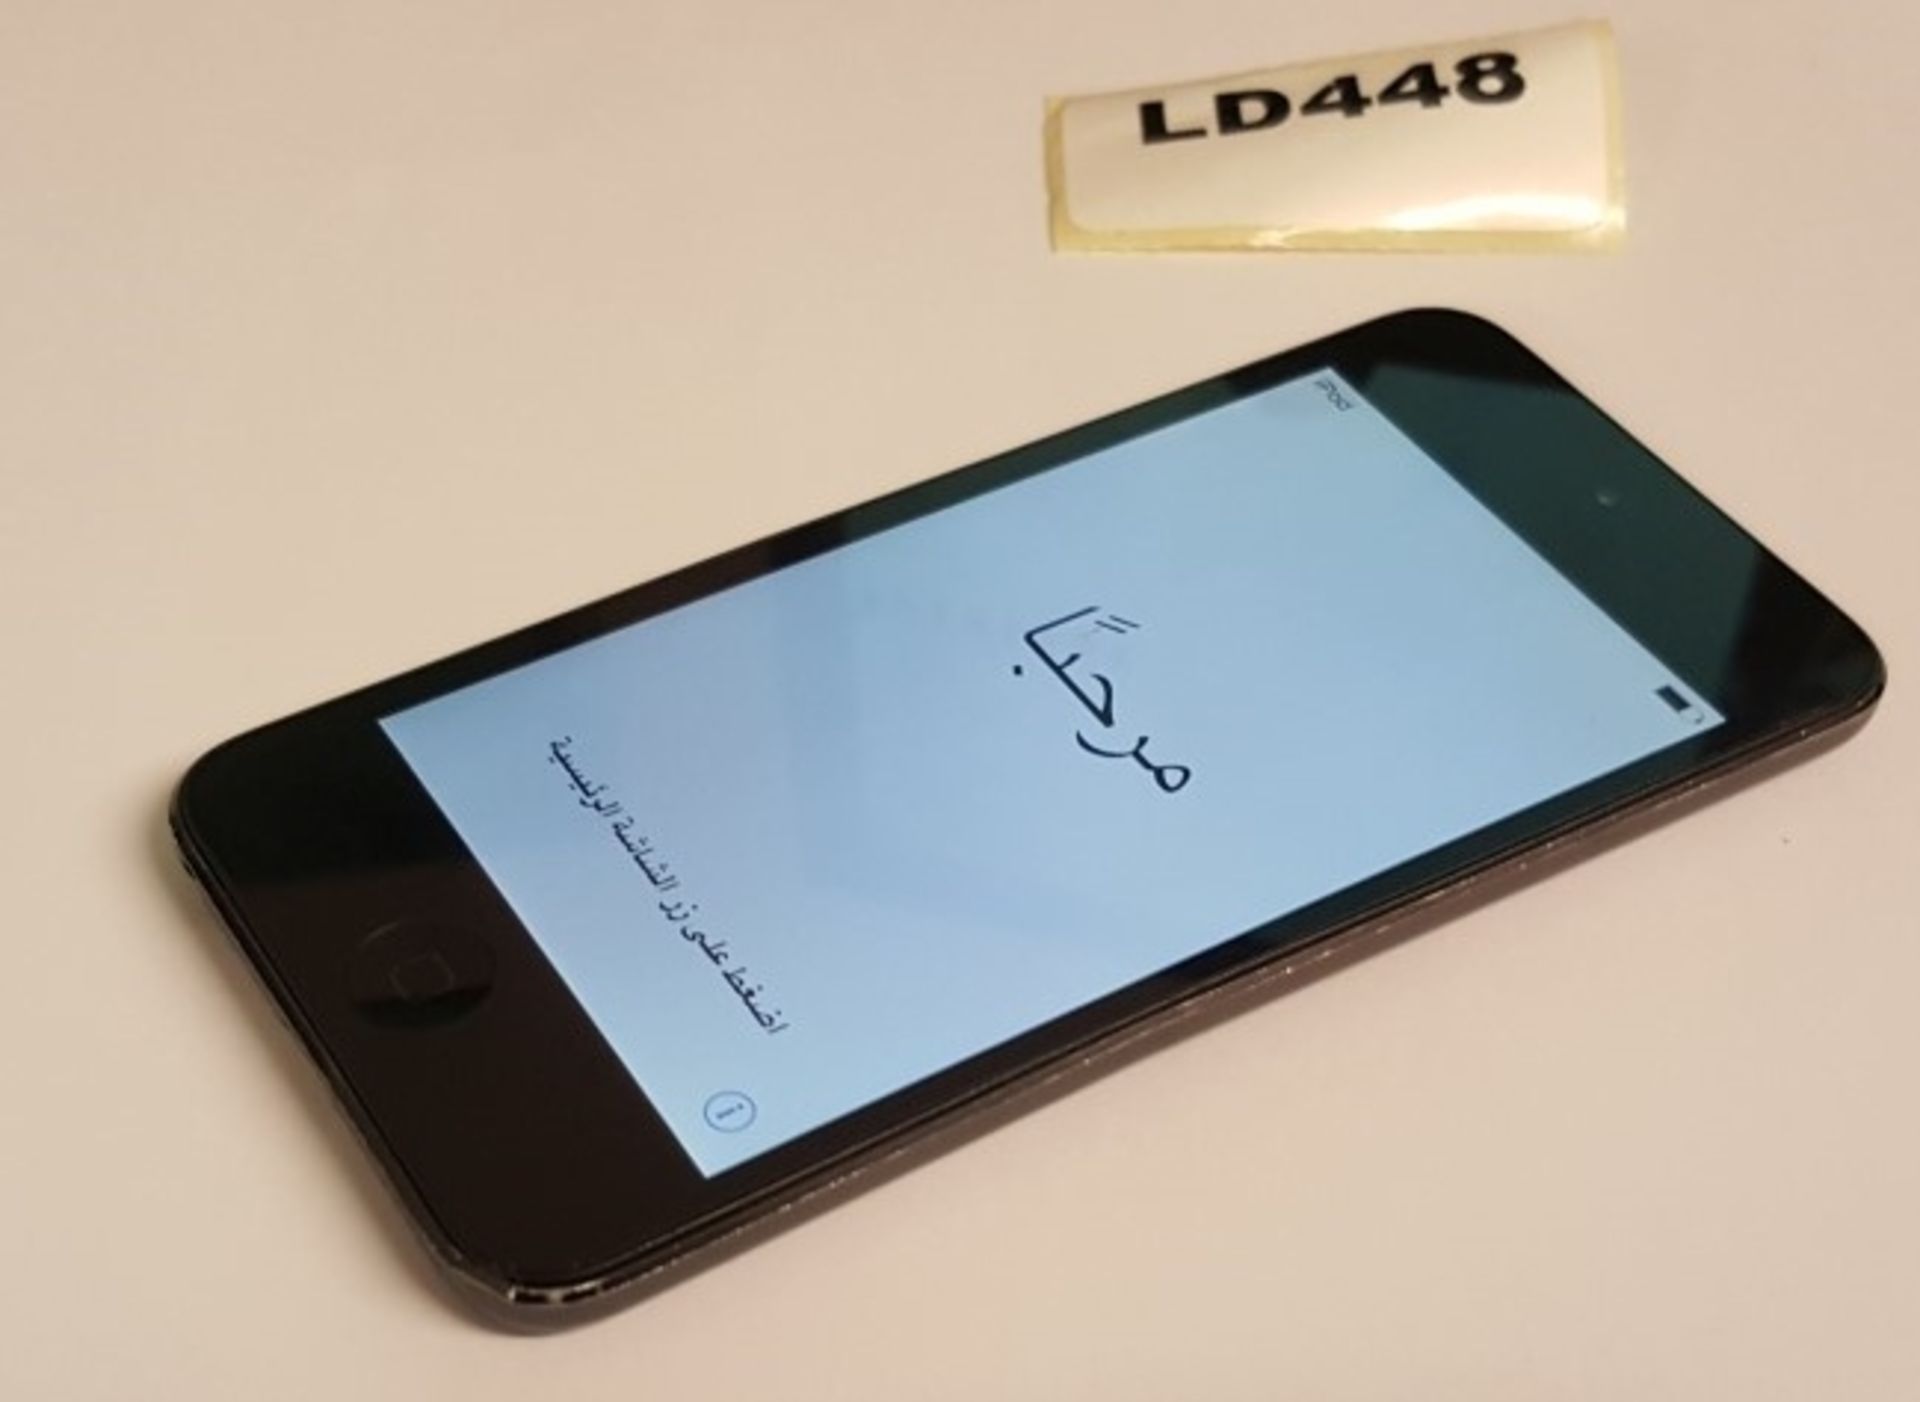 1 x APPLE IPOD TOUCH 6th GEN 16GB IN Dark Space Gray A1574 - LD448 BR - CL461 - Location: Altrincham - Image 3 of 4